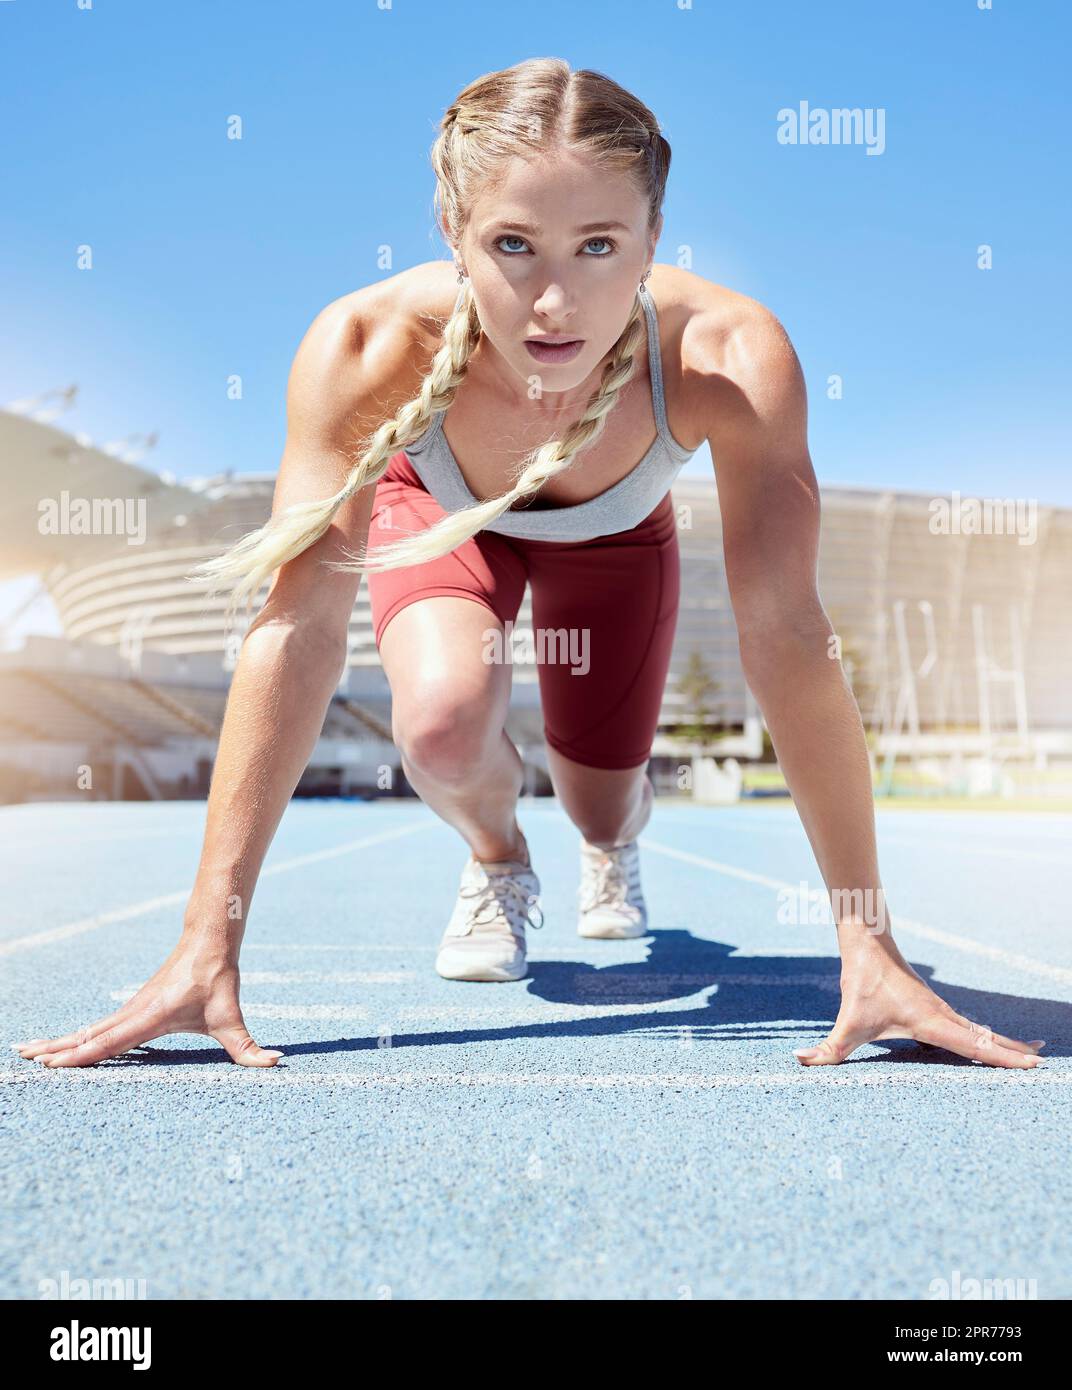 Serious female athlete at the starting line in a track race competition at the stadium. Fit sportswoman mentally and physically prepared to start running at the sprint line or starting block Stock Photo